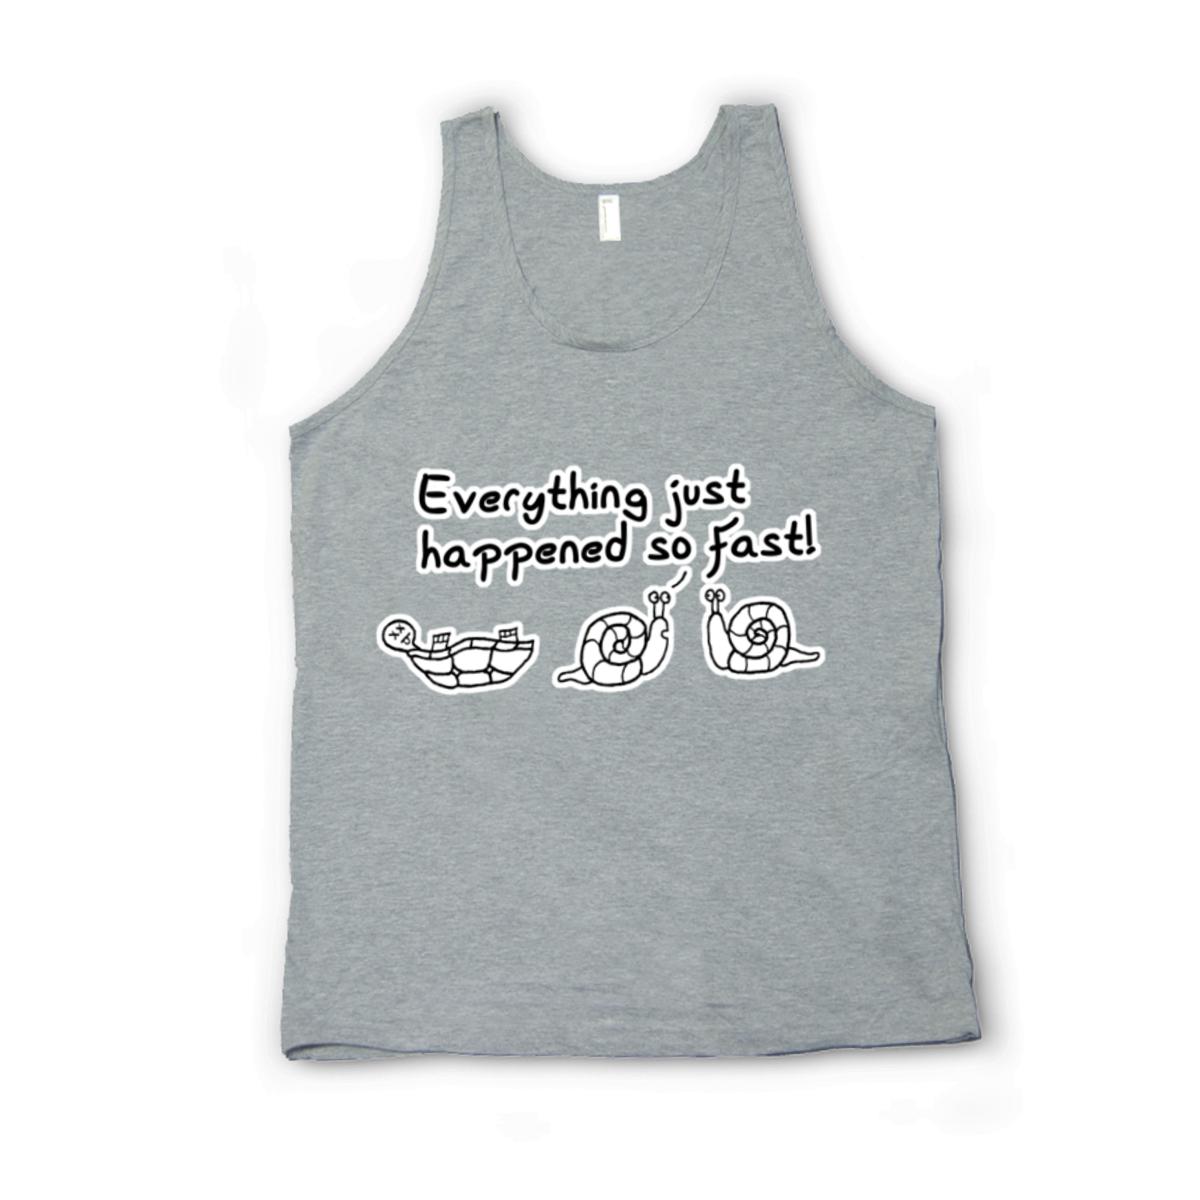 Happened So Fast Unisex Tank Top Extra Large heather-grey